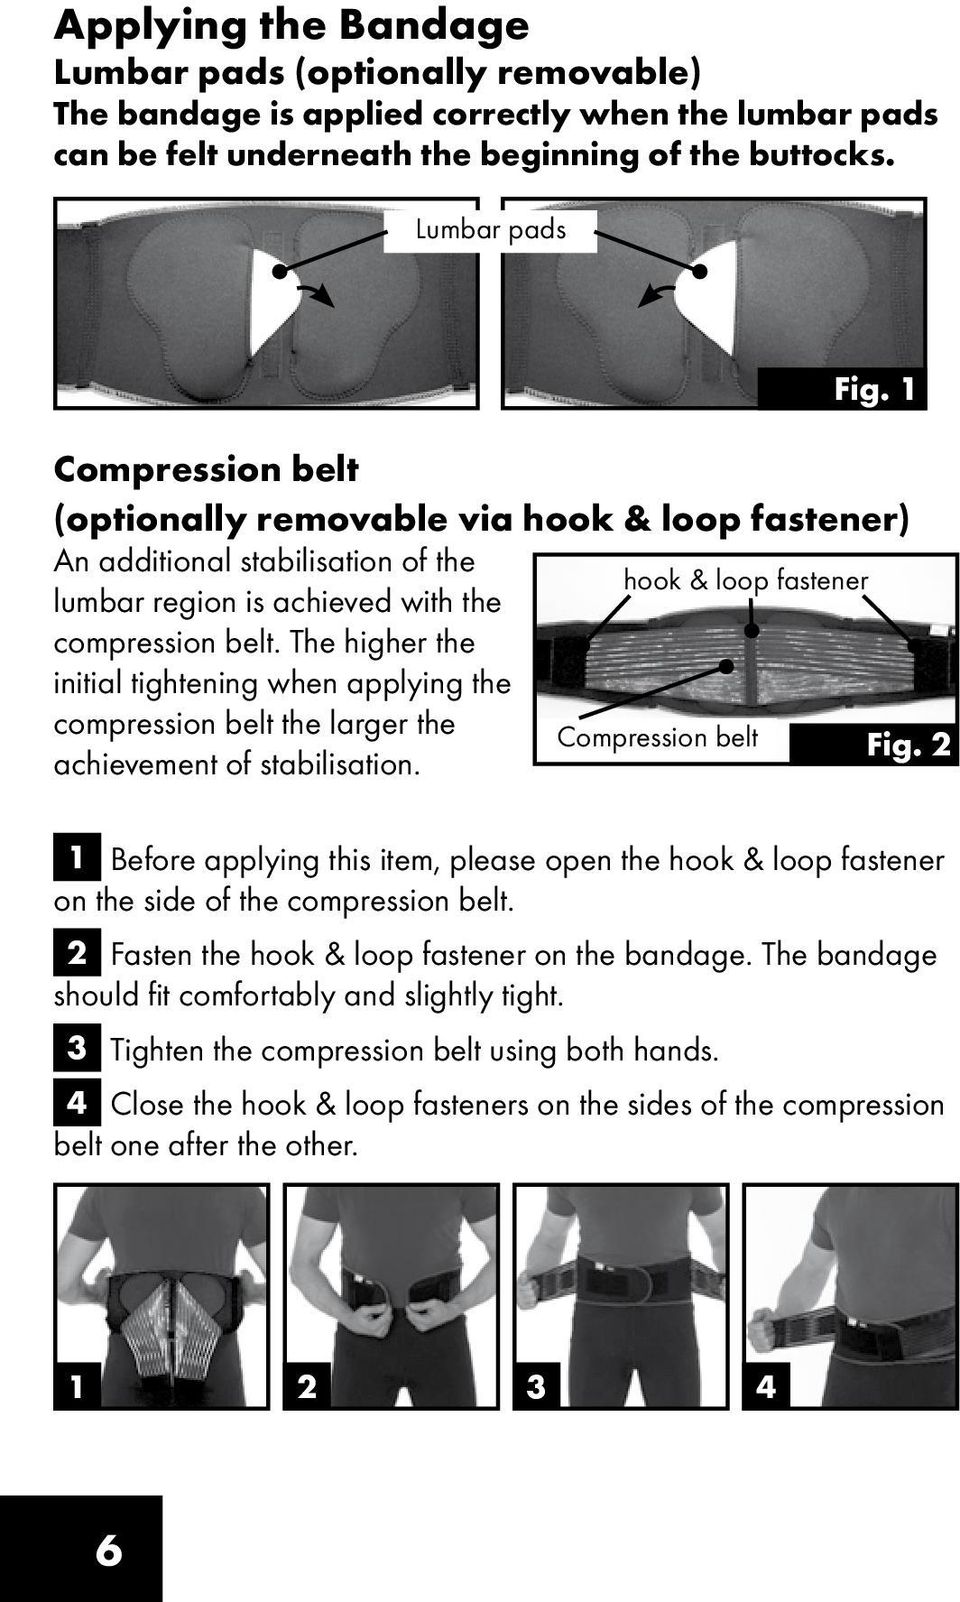 The higher the initial tightening when applying the compression belt the larger the achievement of stabilisation. Compression belt Fig.